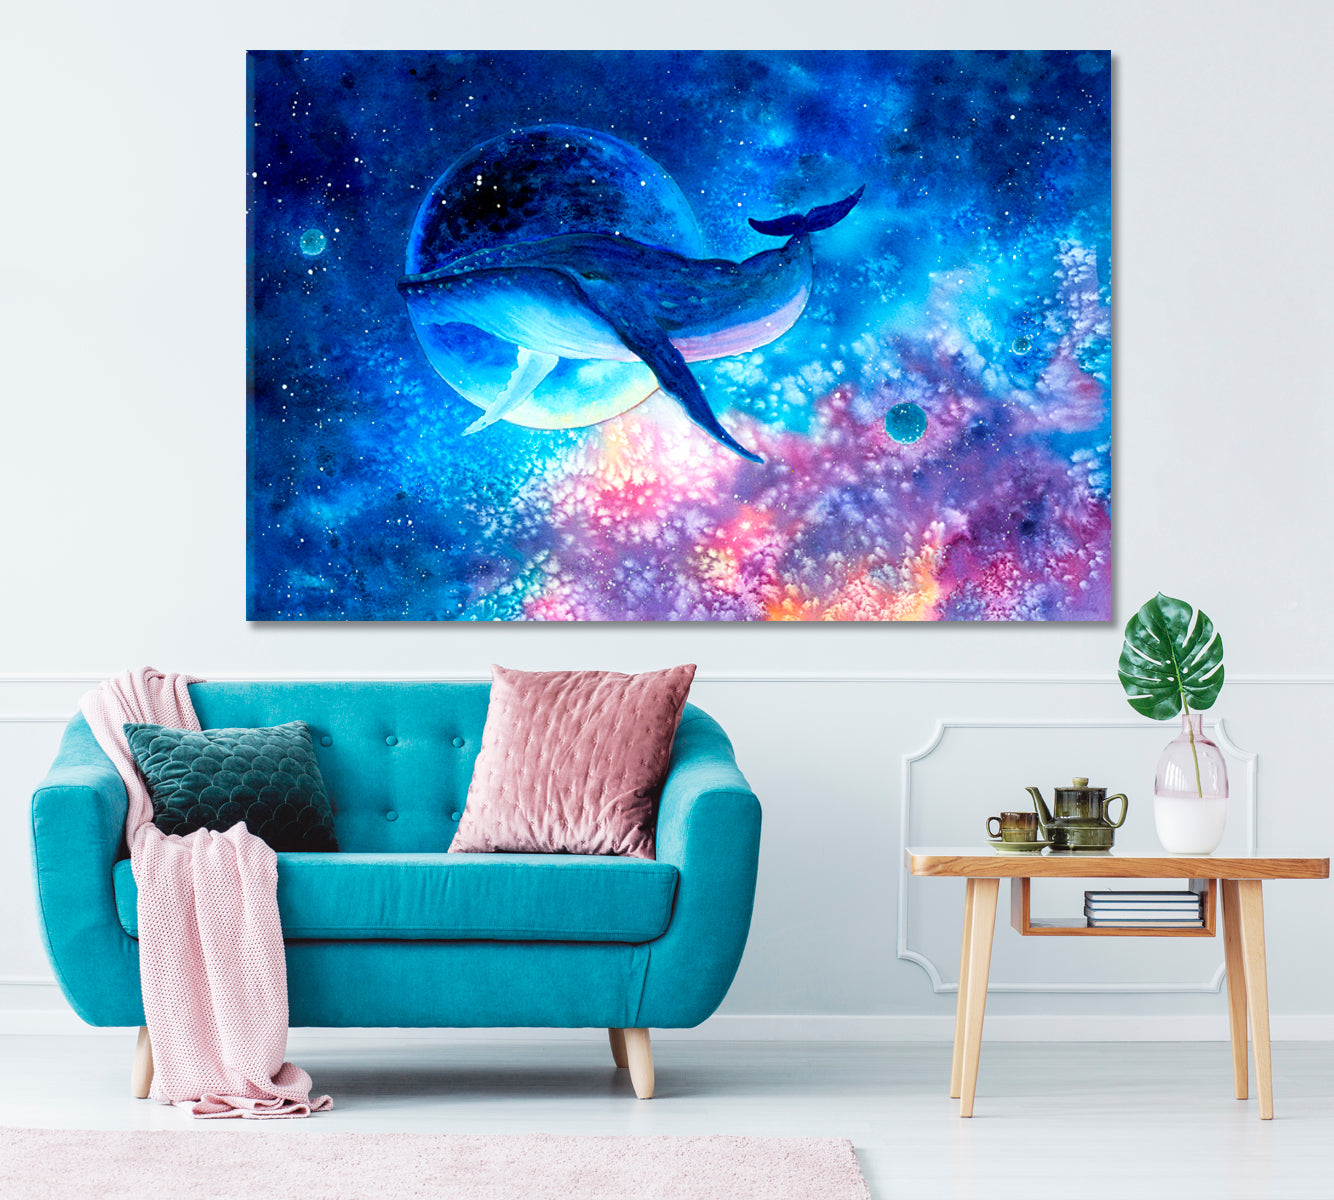 Whale in Space Canvas Print ArtLexy 1 Panel 24"x16" inches 